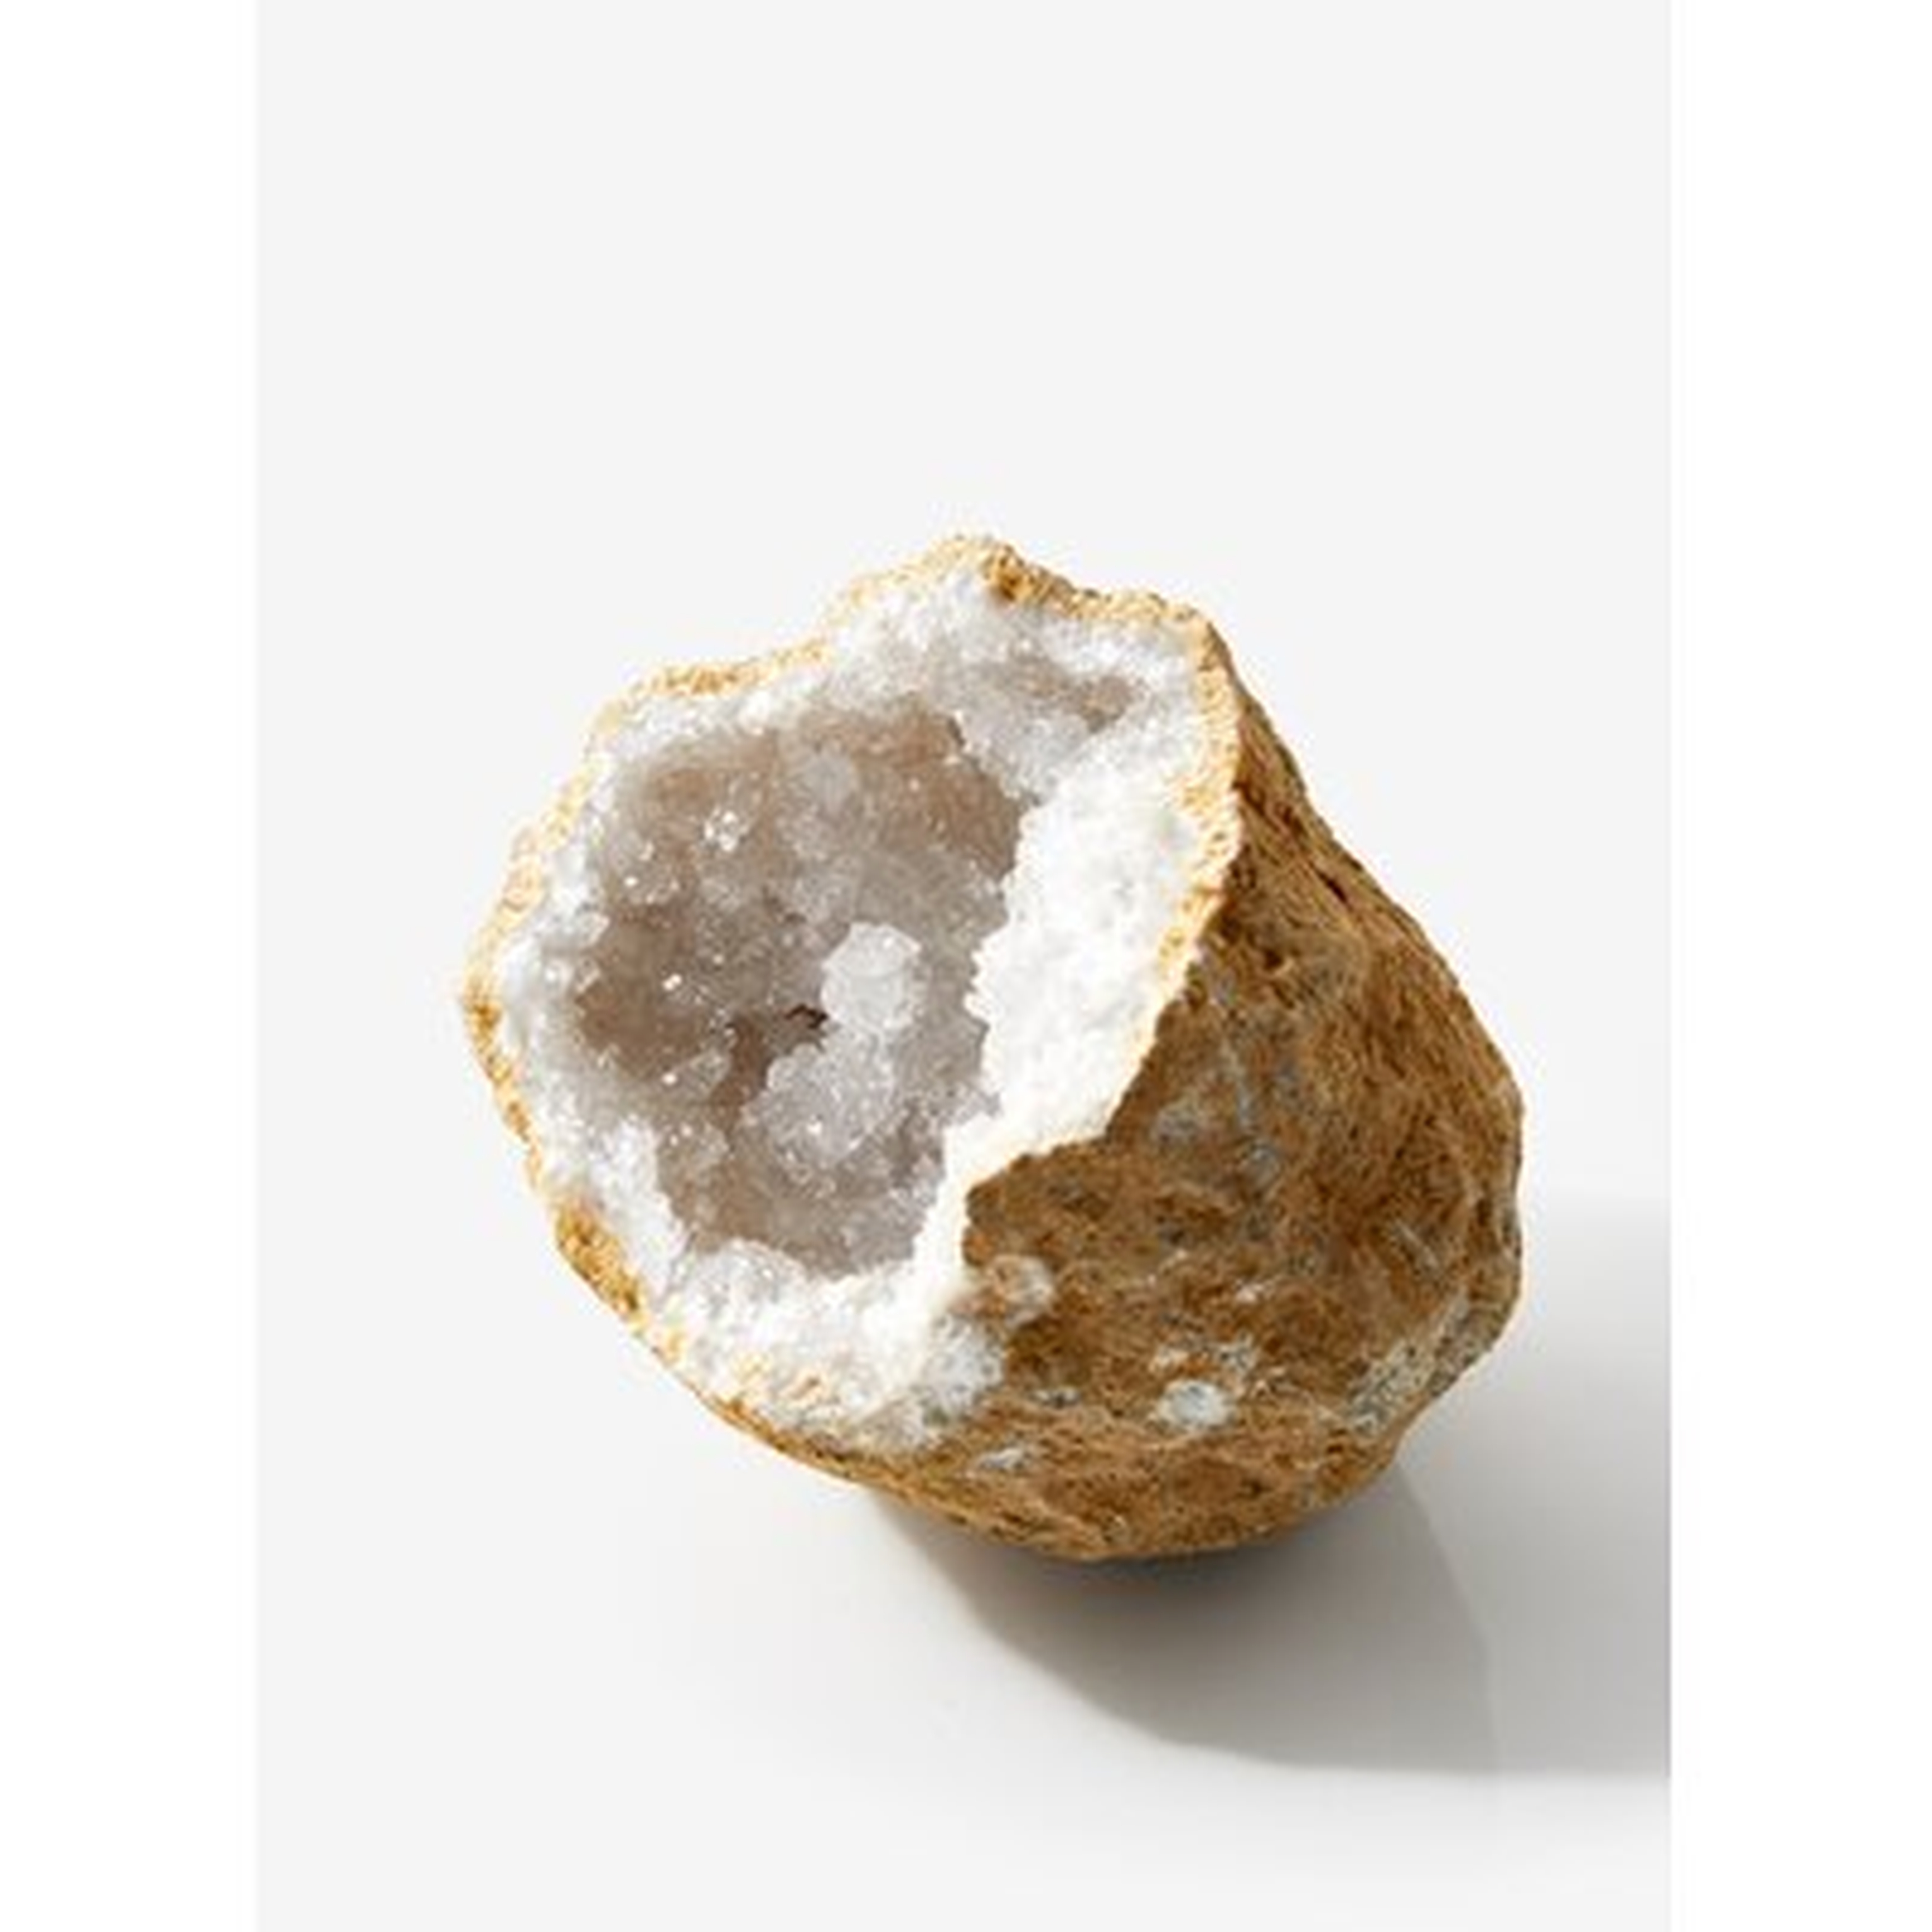 Foundry Select Extra Large Moroccan Calcite Geodes, Ideal For Home And Office Décor, Measures 9" Tall 9" Long And 9.5" Wide - Wayfair